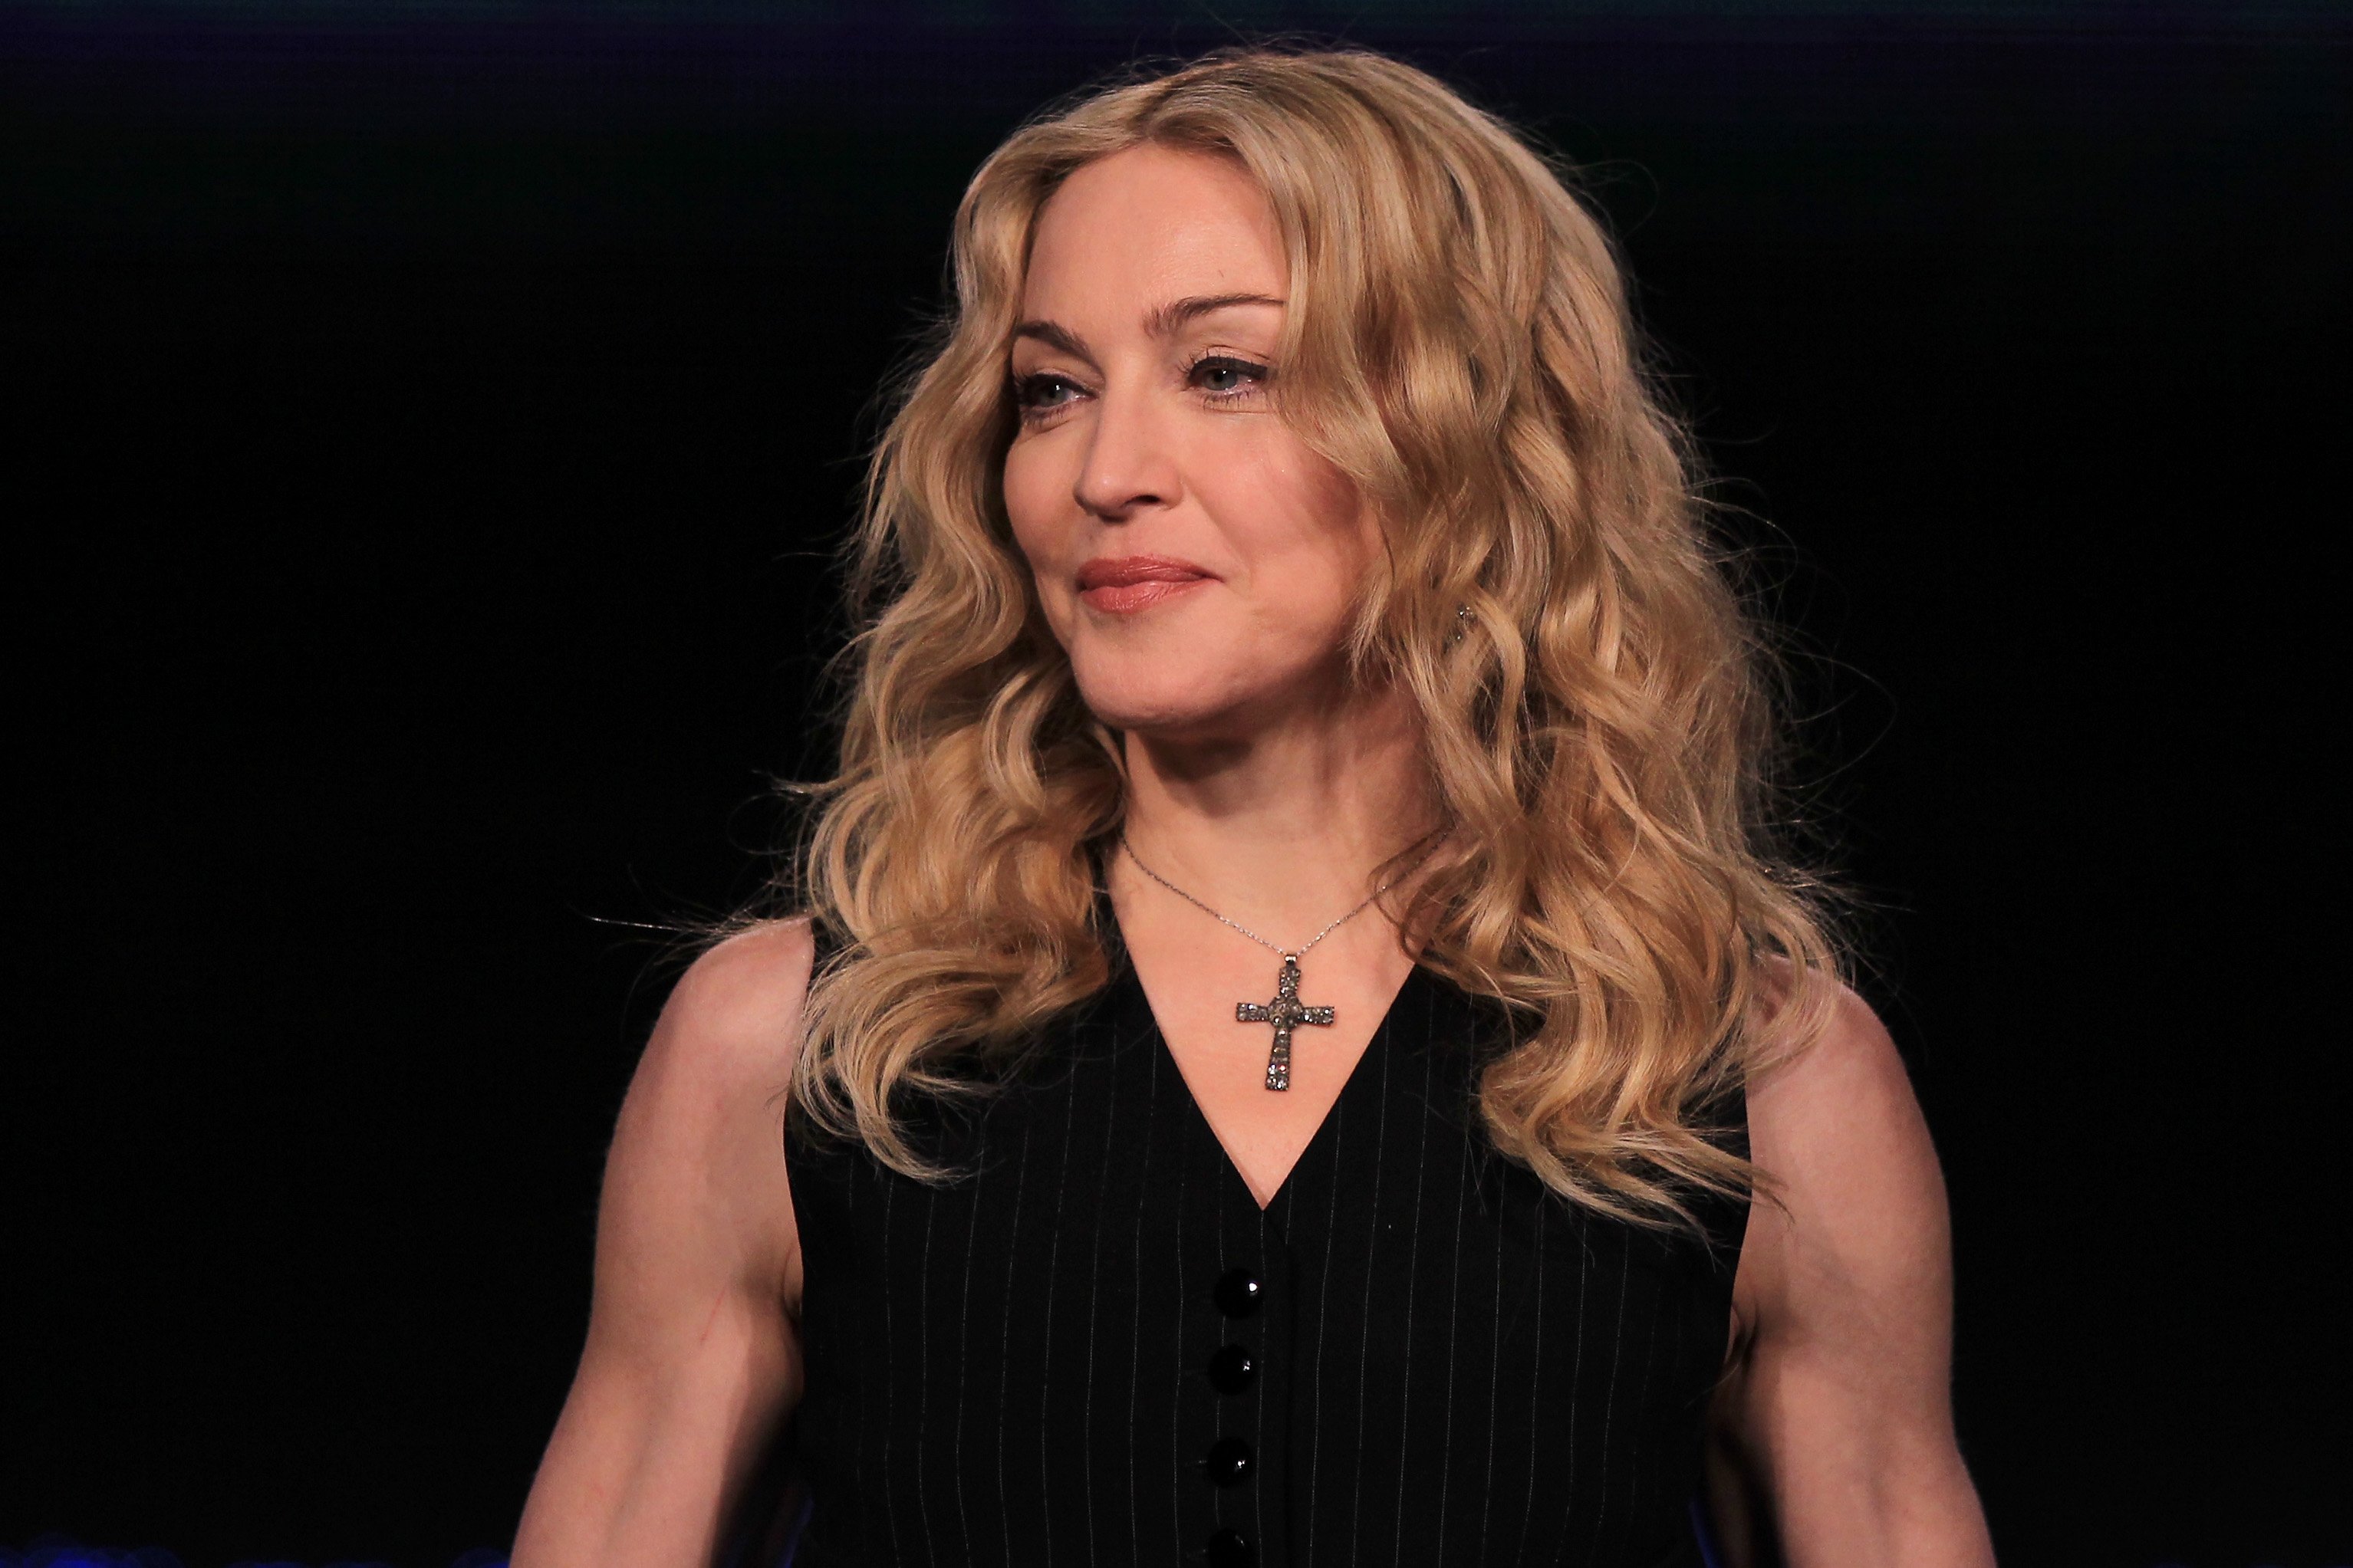 Madonna during a press conference for the Bridgestone Super Bowl XLVI halftime show at the Super Bowl XLVI Media Center on February 2, 2012. | Photo: GettyImages